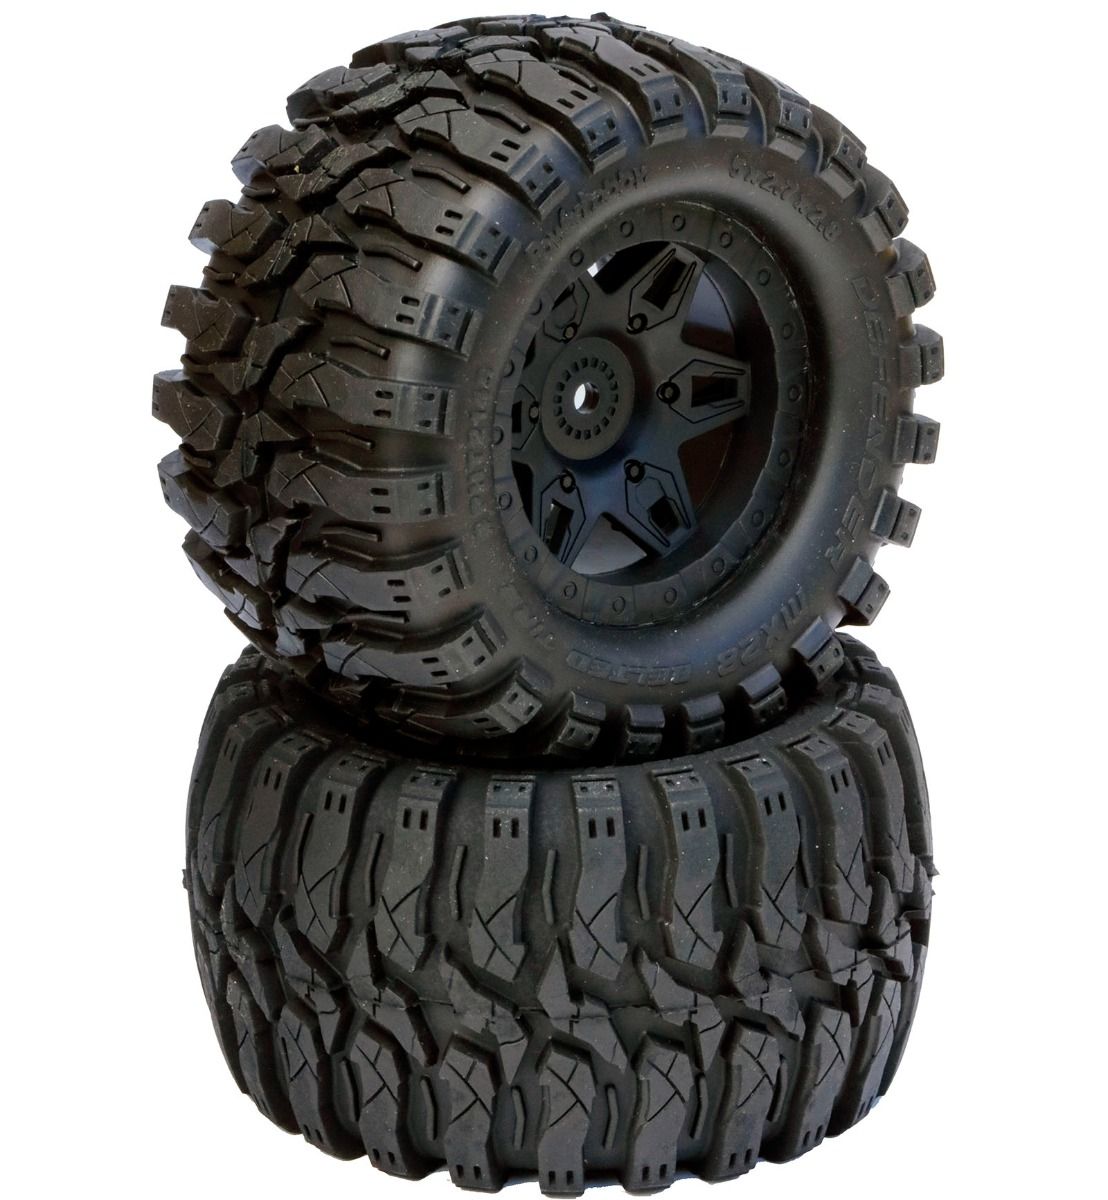 Powerhobby Defender 2.8 Belted All Terrain Tires Mounted 17mm 1/2 Offset 1/10 Truck